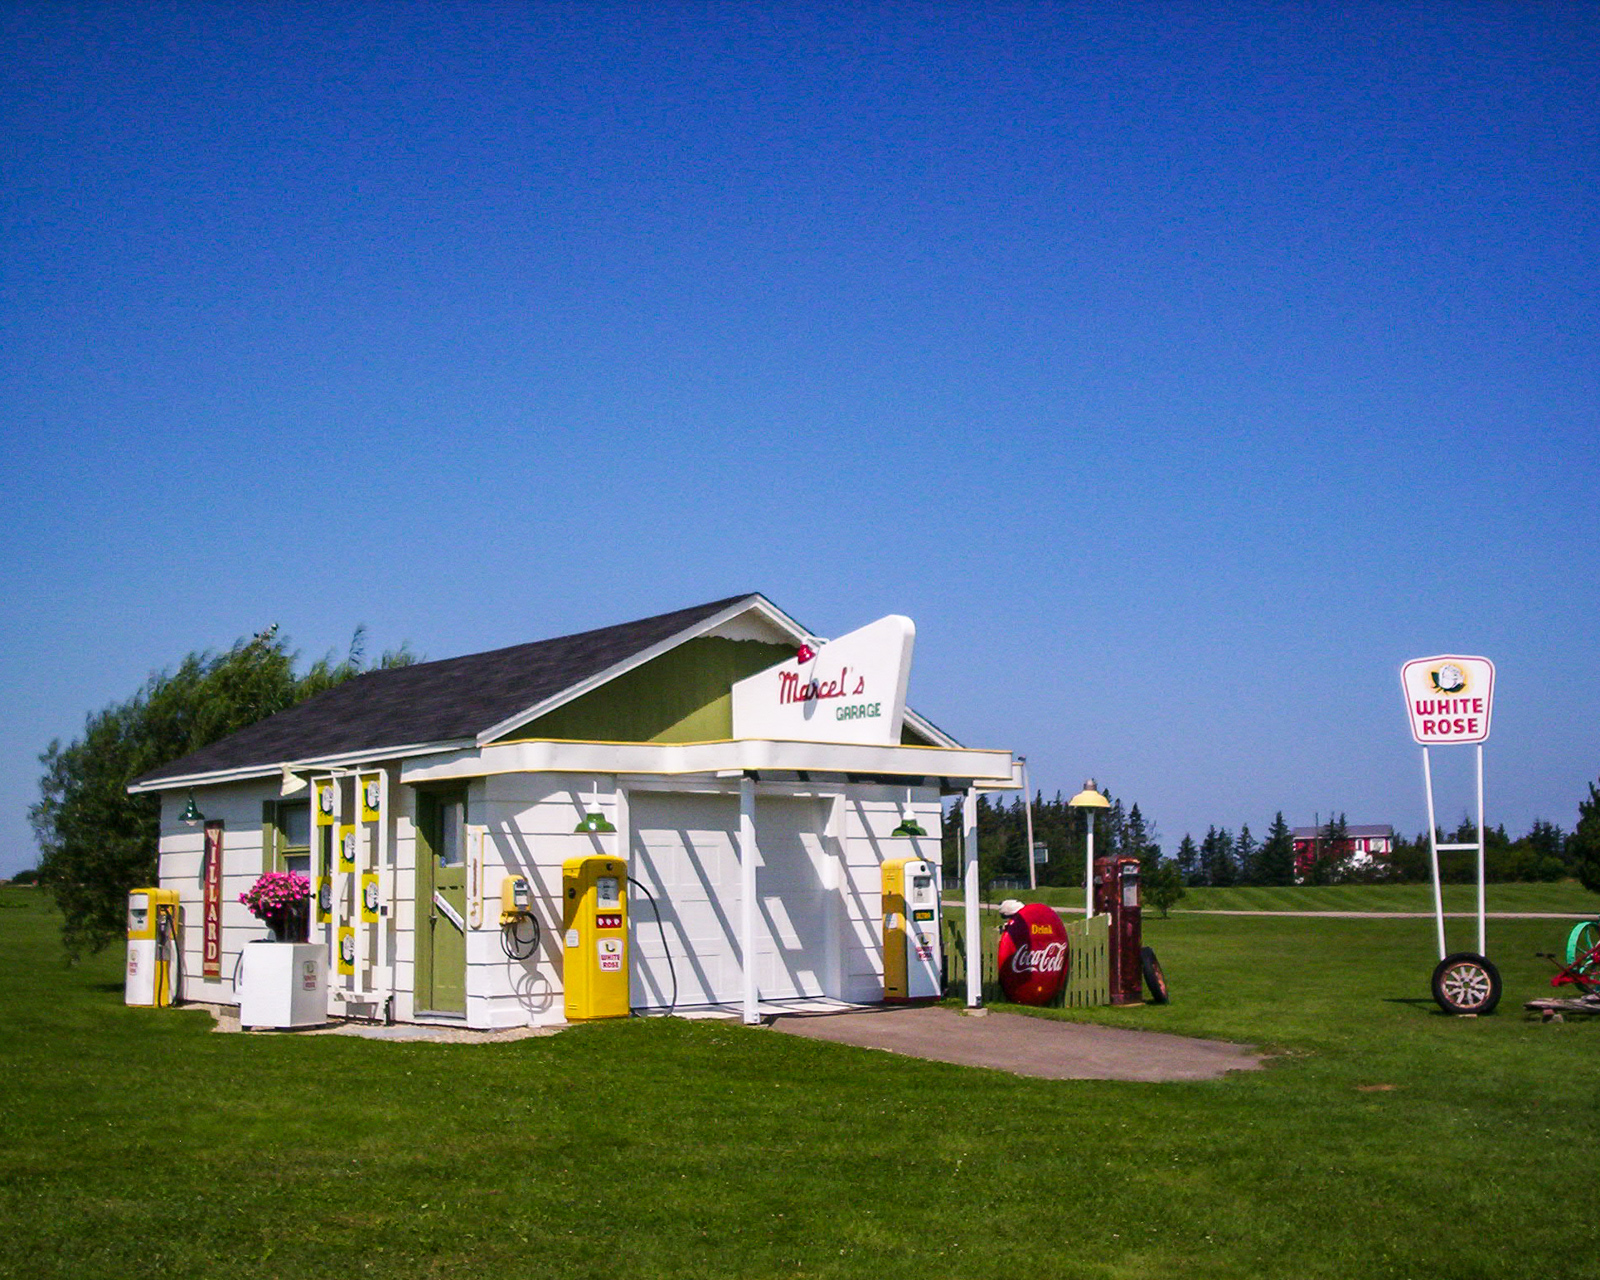 gas station replica made from a garage